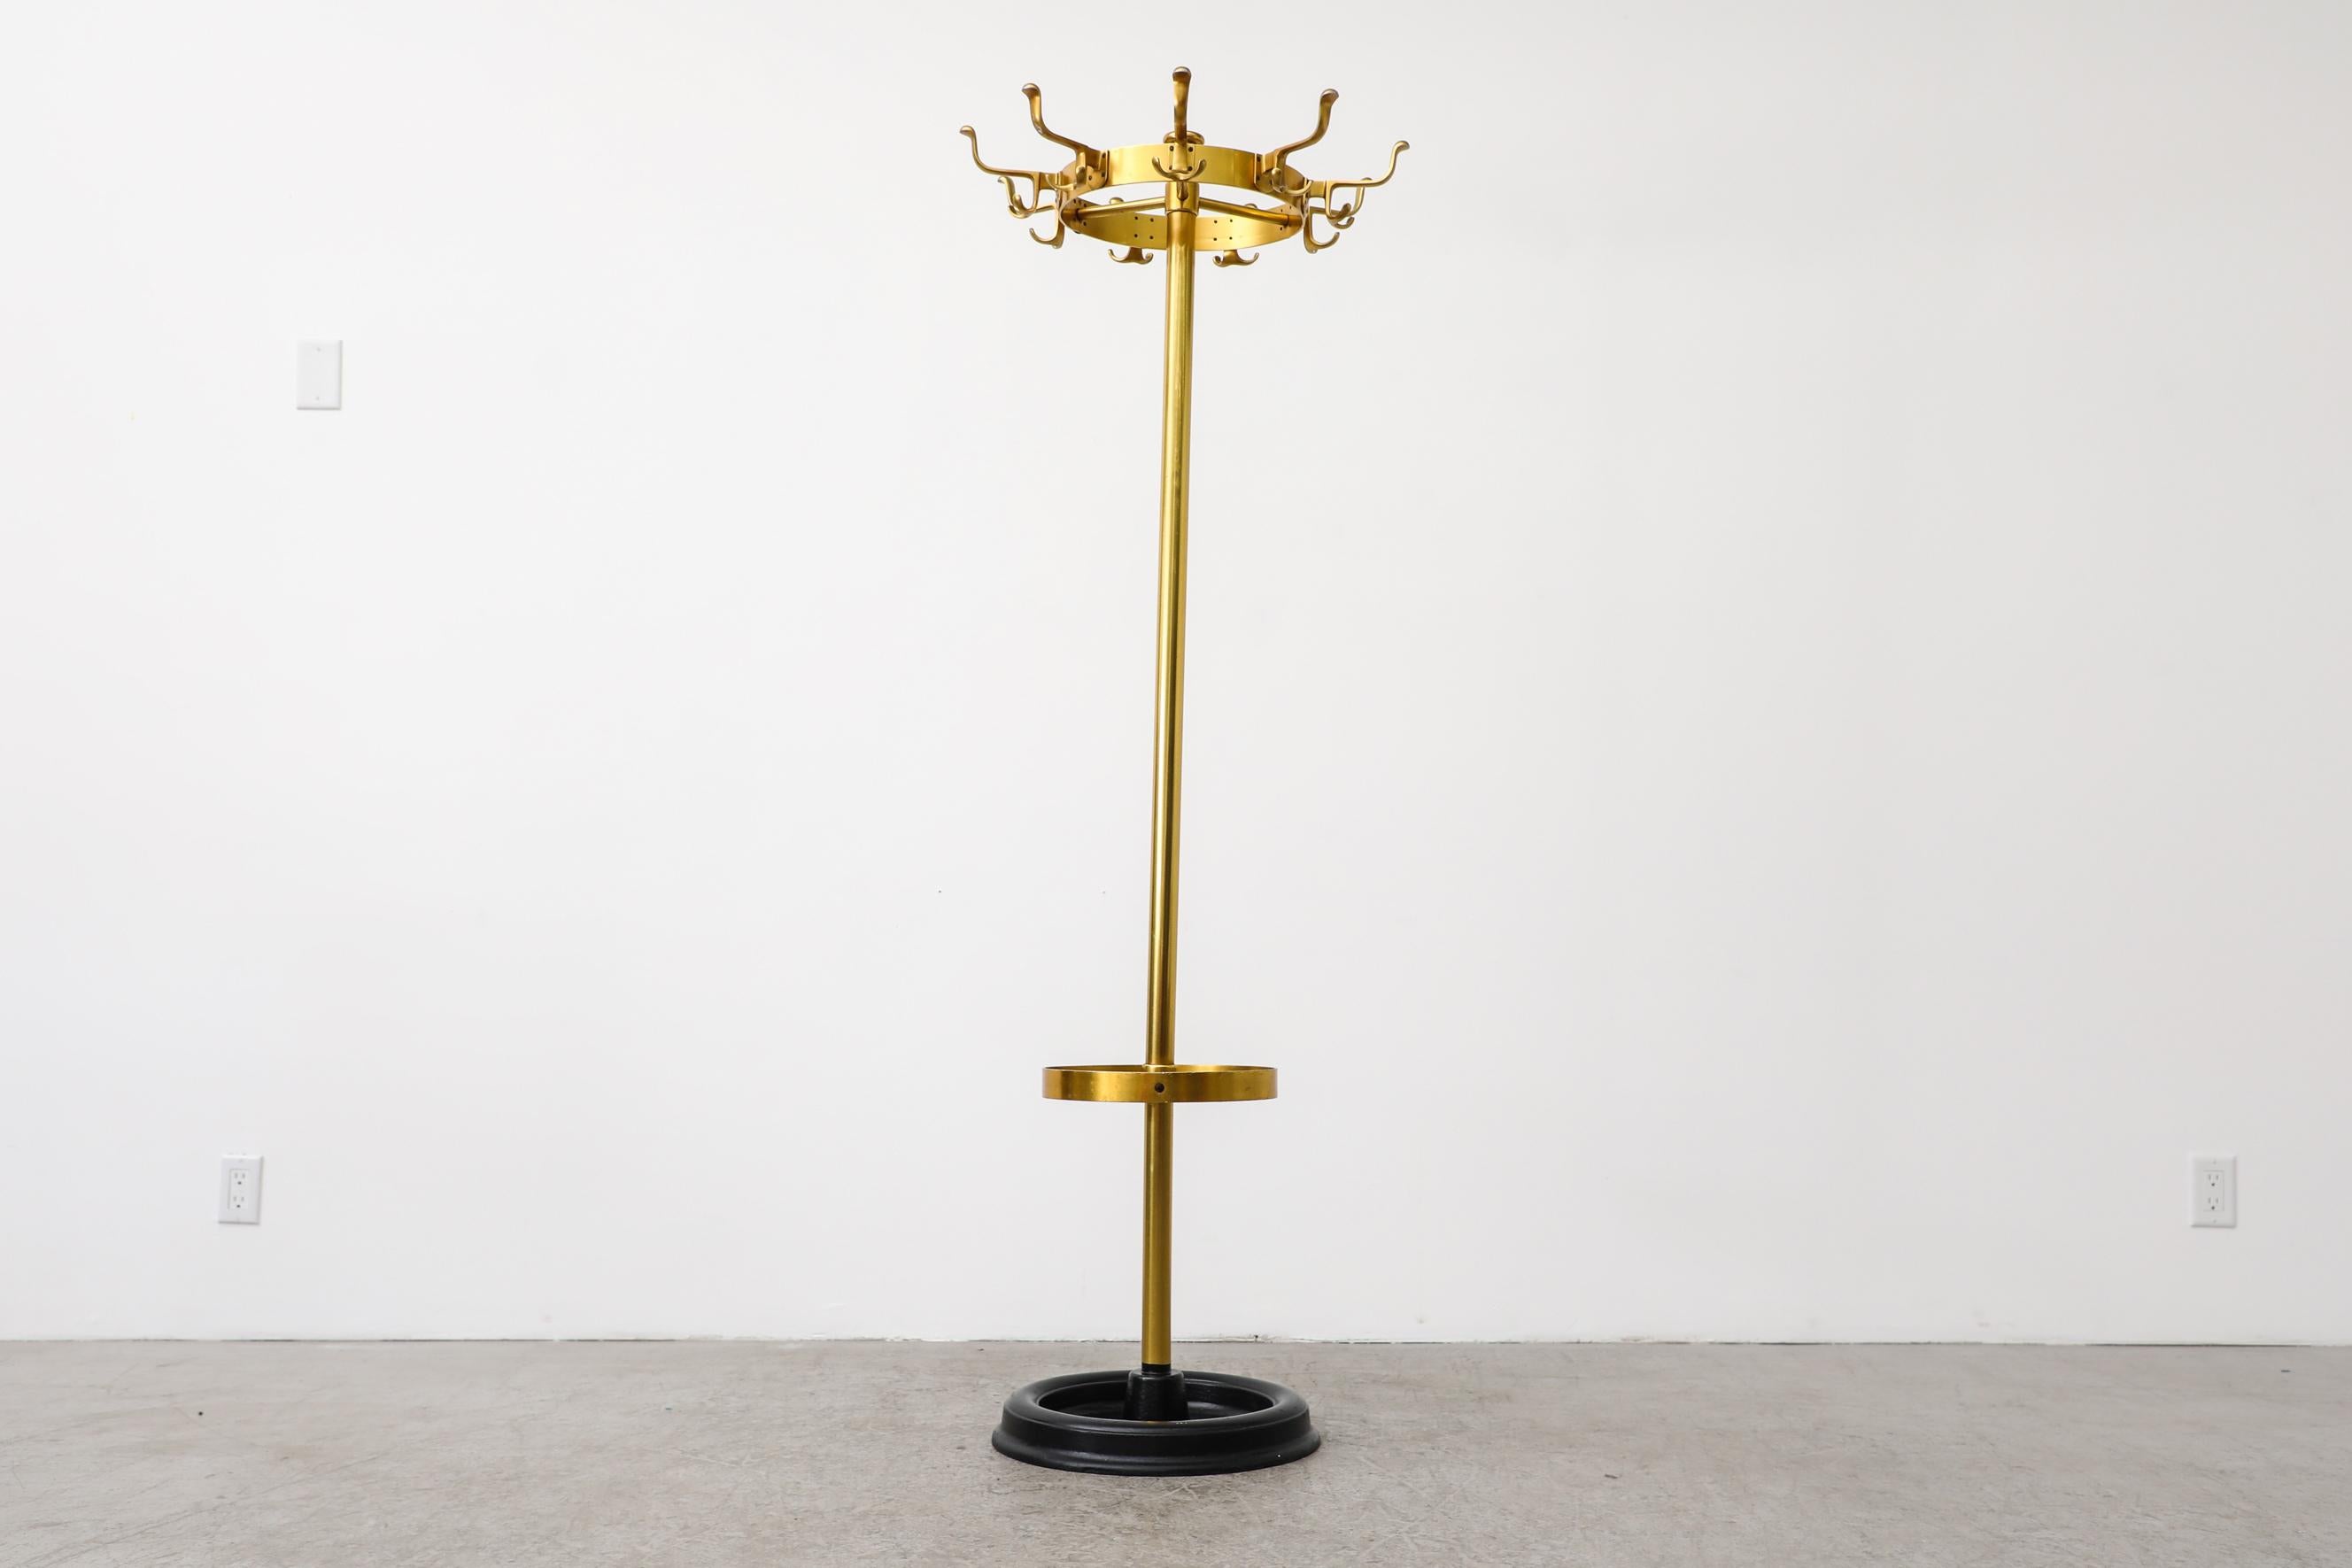 Vintage standing gold enameled metal coat rack. The coat rack has a circular hook crown at the top and an umbrella holder with weighted black painted base. In original condition with visible wear, including scratches, dents and chips. Wear is